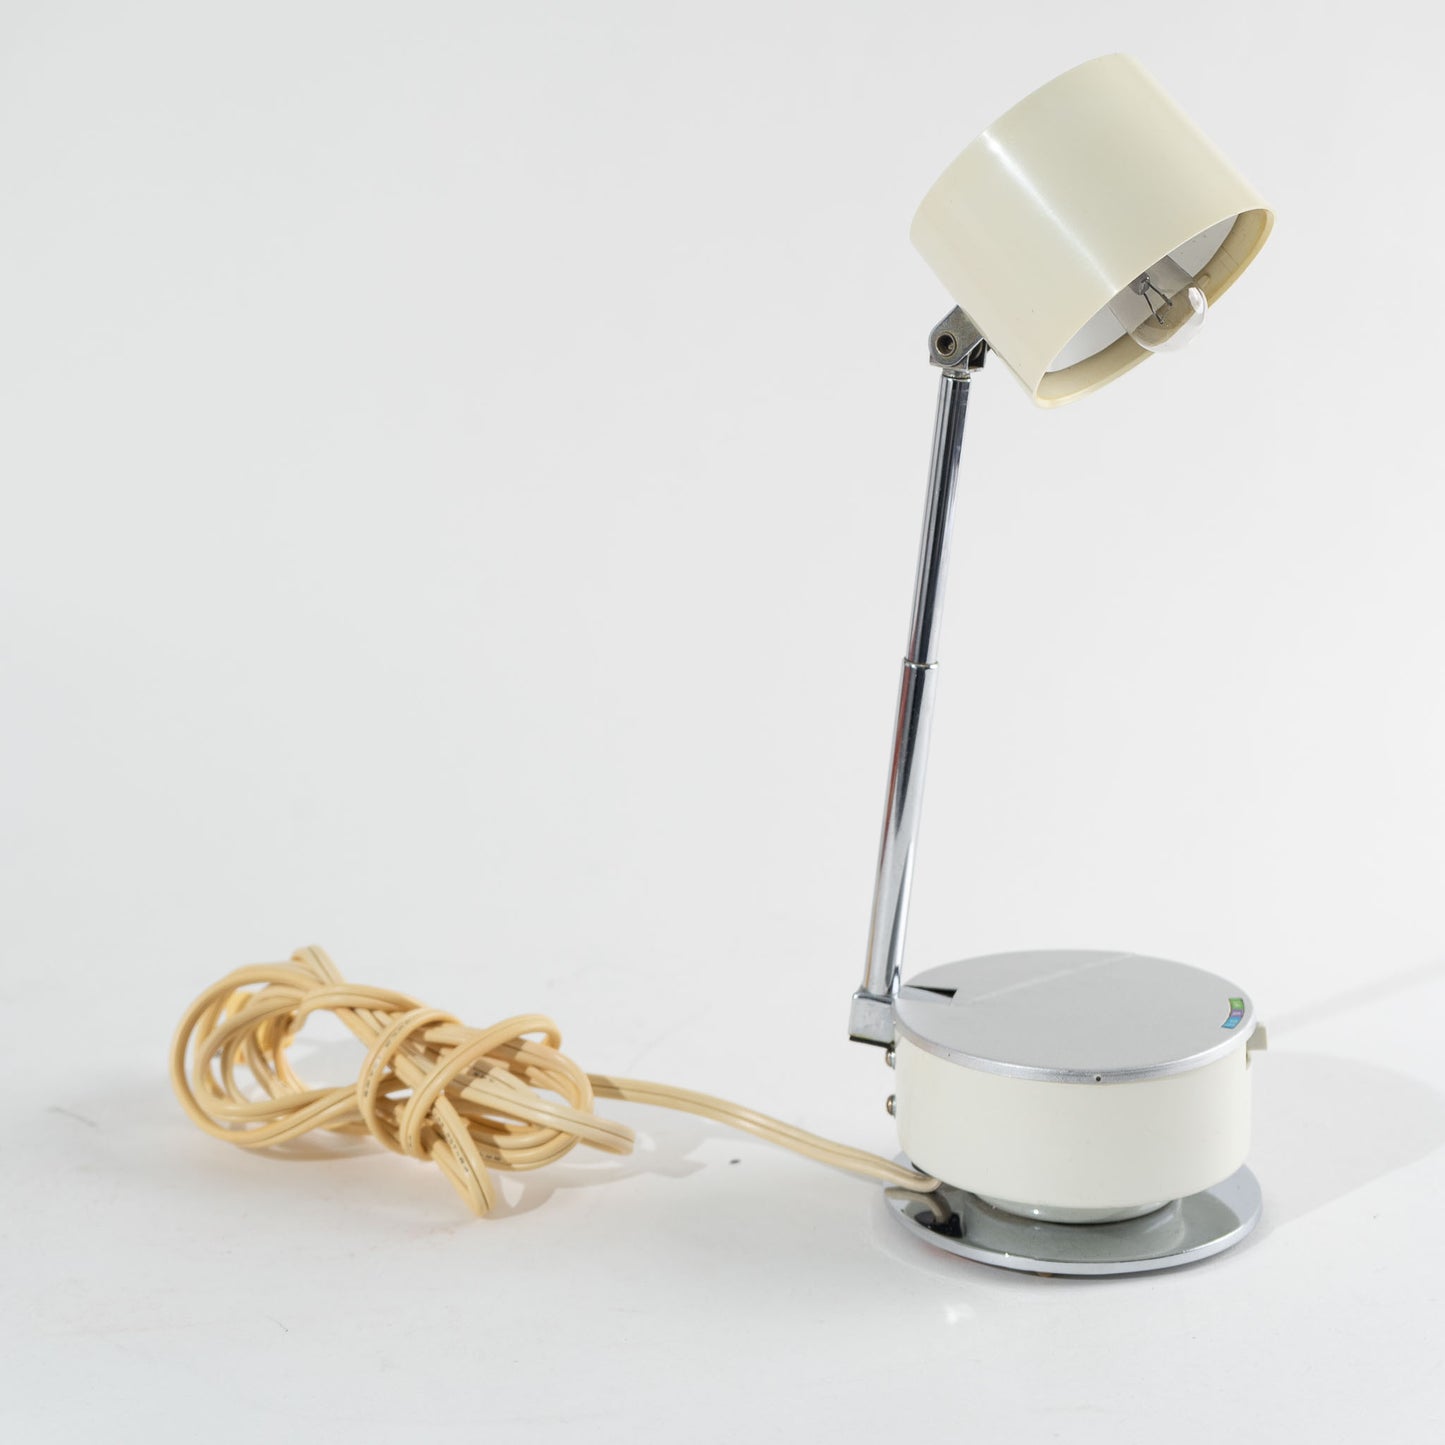 Load image into Gallery viewer, Vintage Japanese Telescoping Desk Lamp
